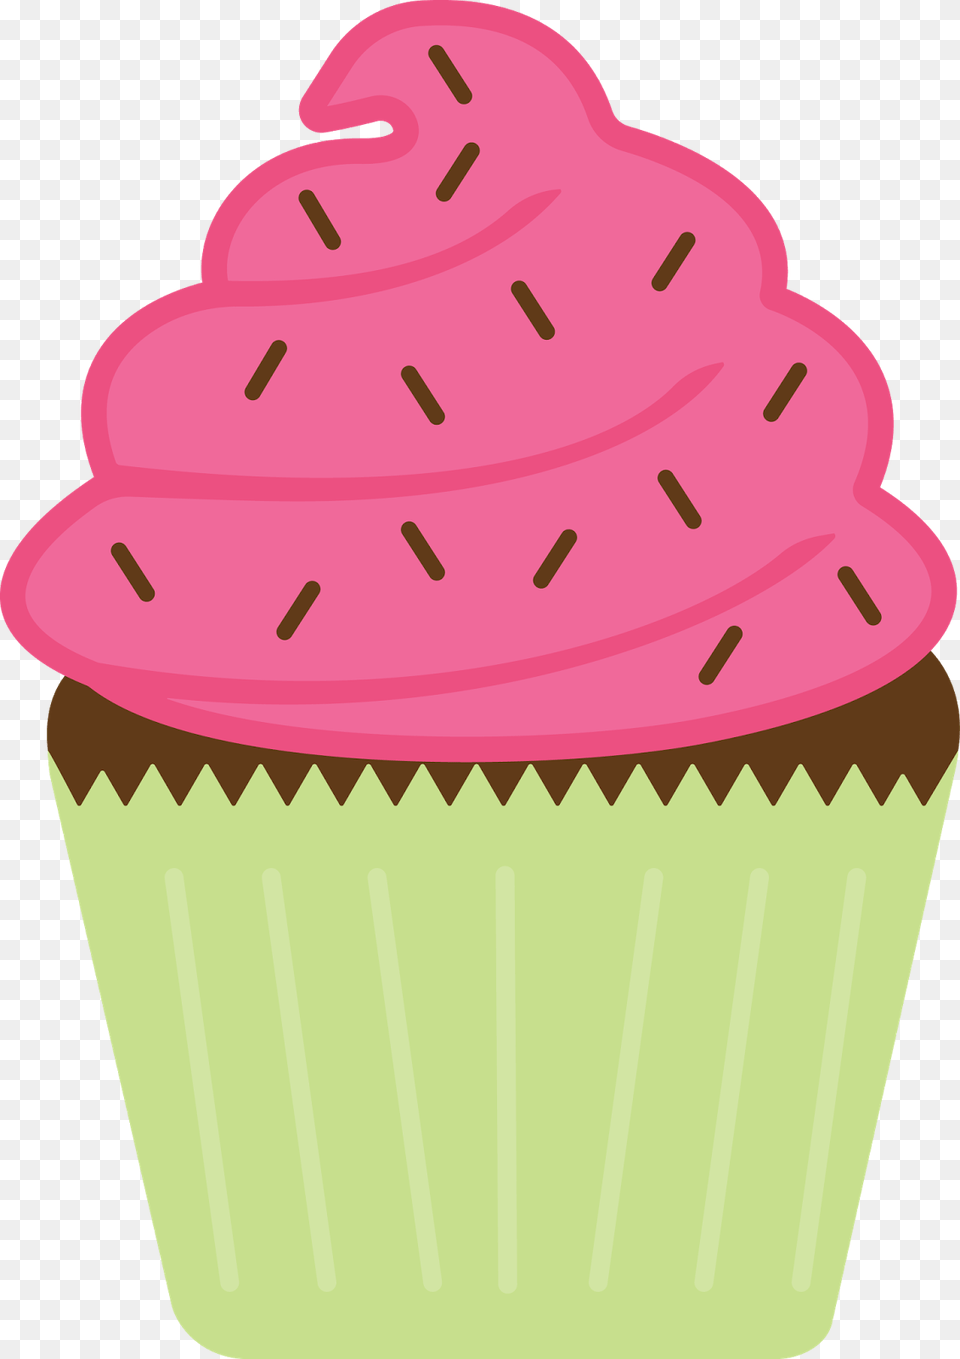 Collection Of Cupcakes Drawing Beginner Download Silhouette Cupcakes Clipart Background, Cake, Cream, Cupcake, Dessert Png